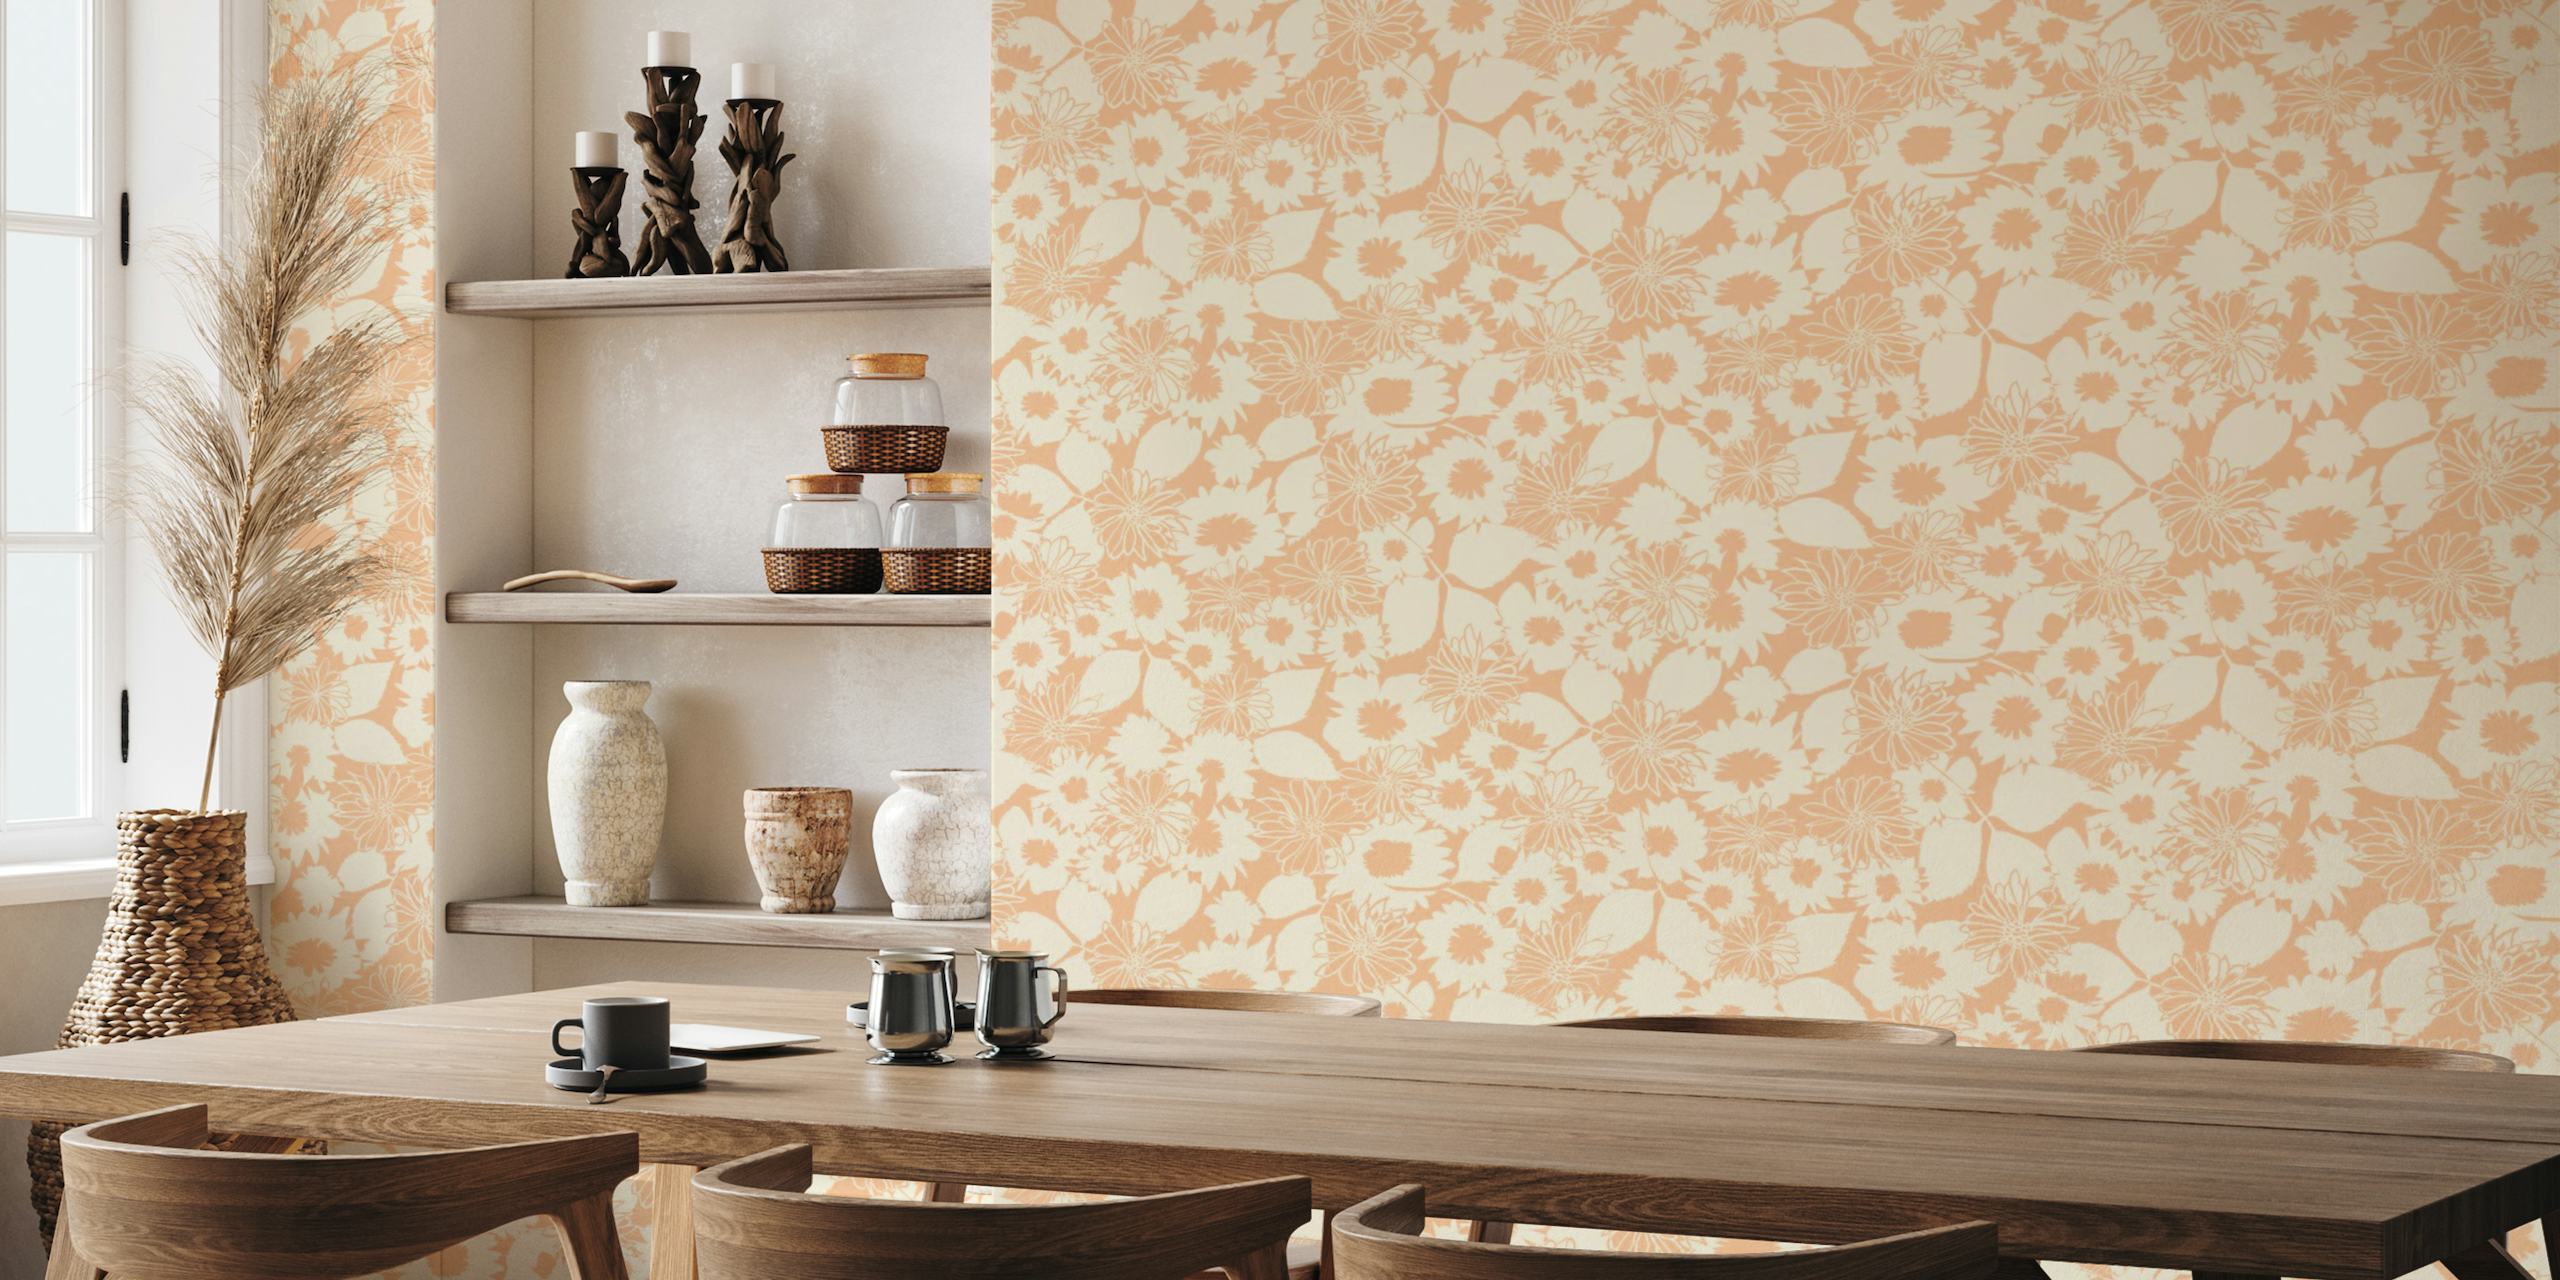 Abstract floral pattern wall mural in pastel peach tones